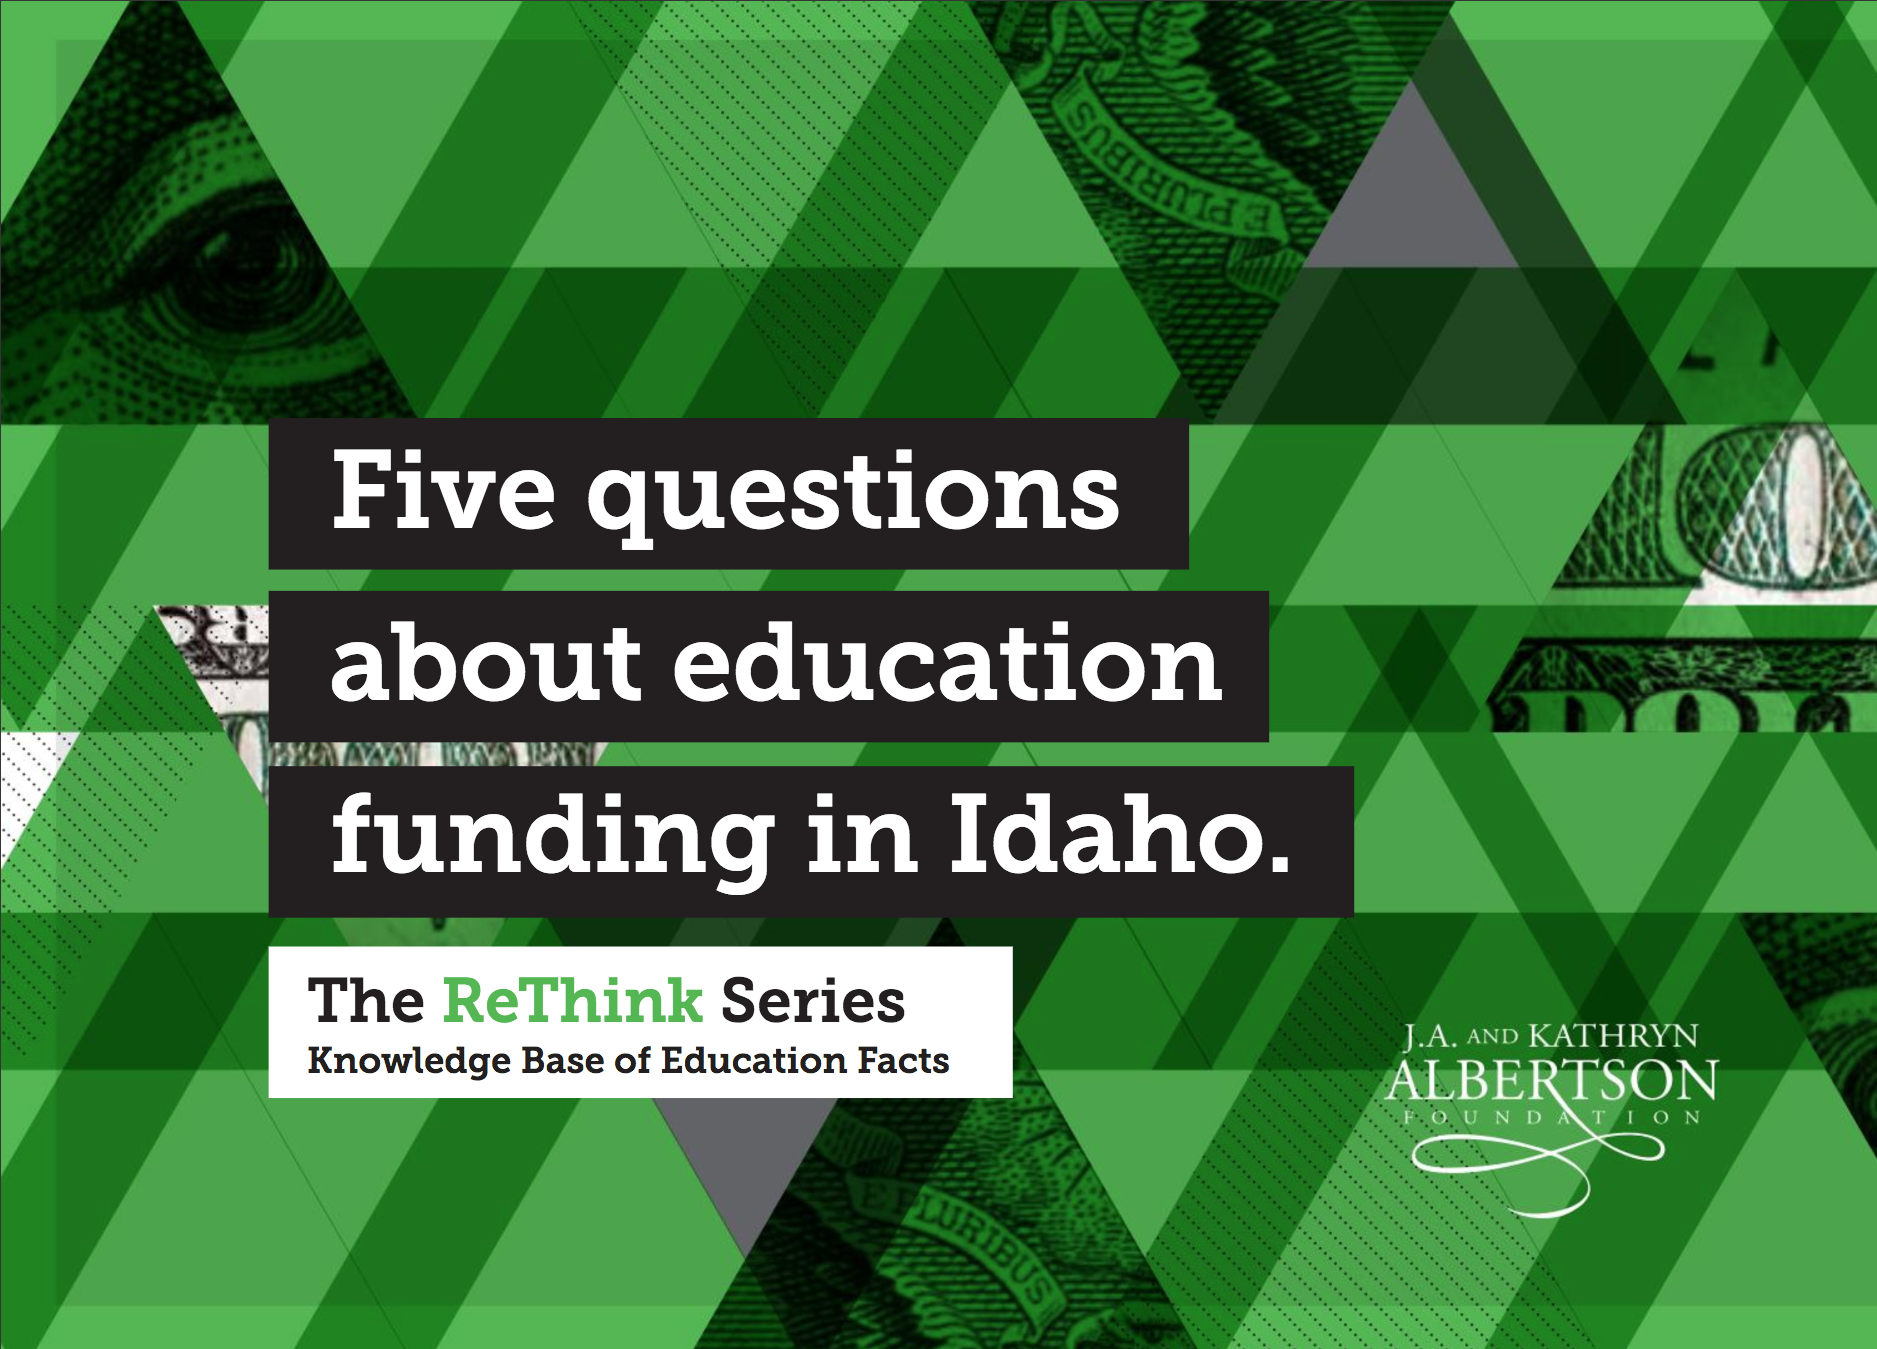 Five Questions About Education Funding in Idaho.